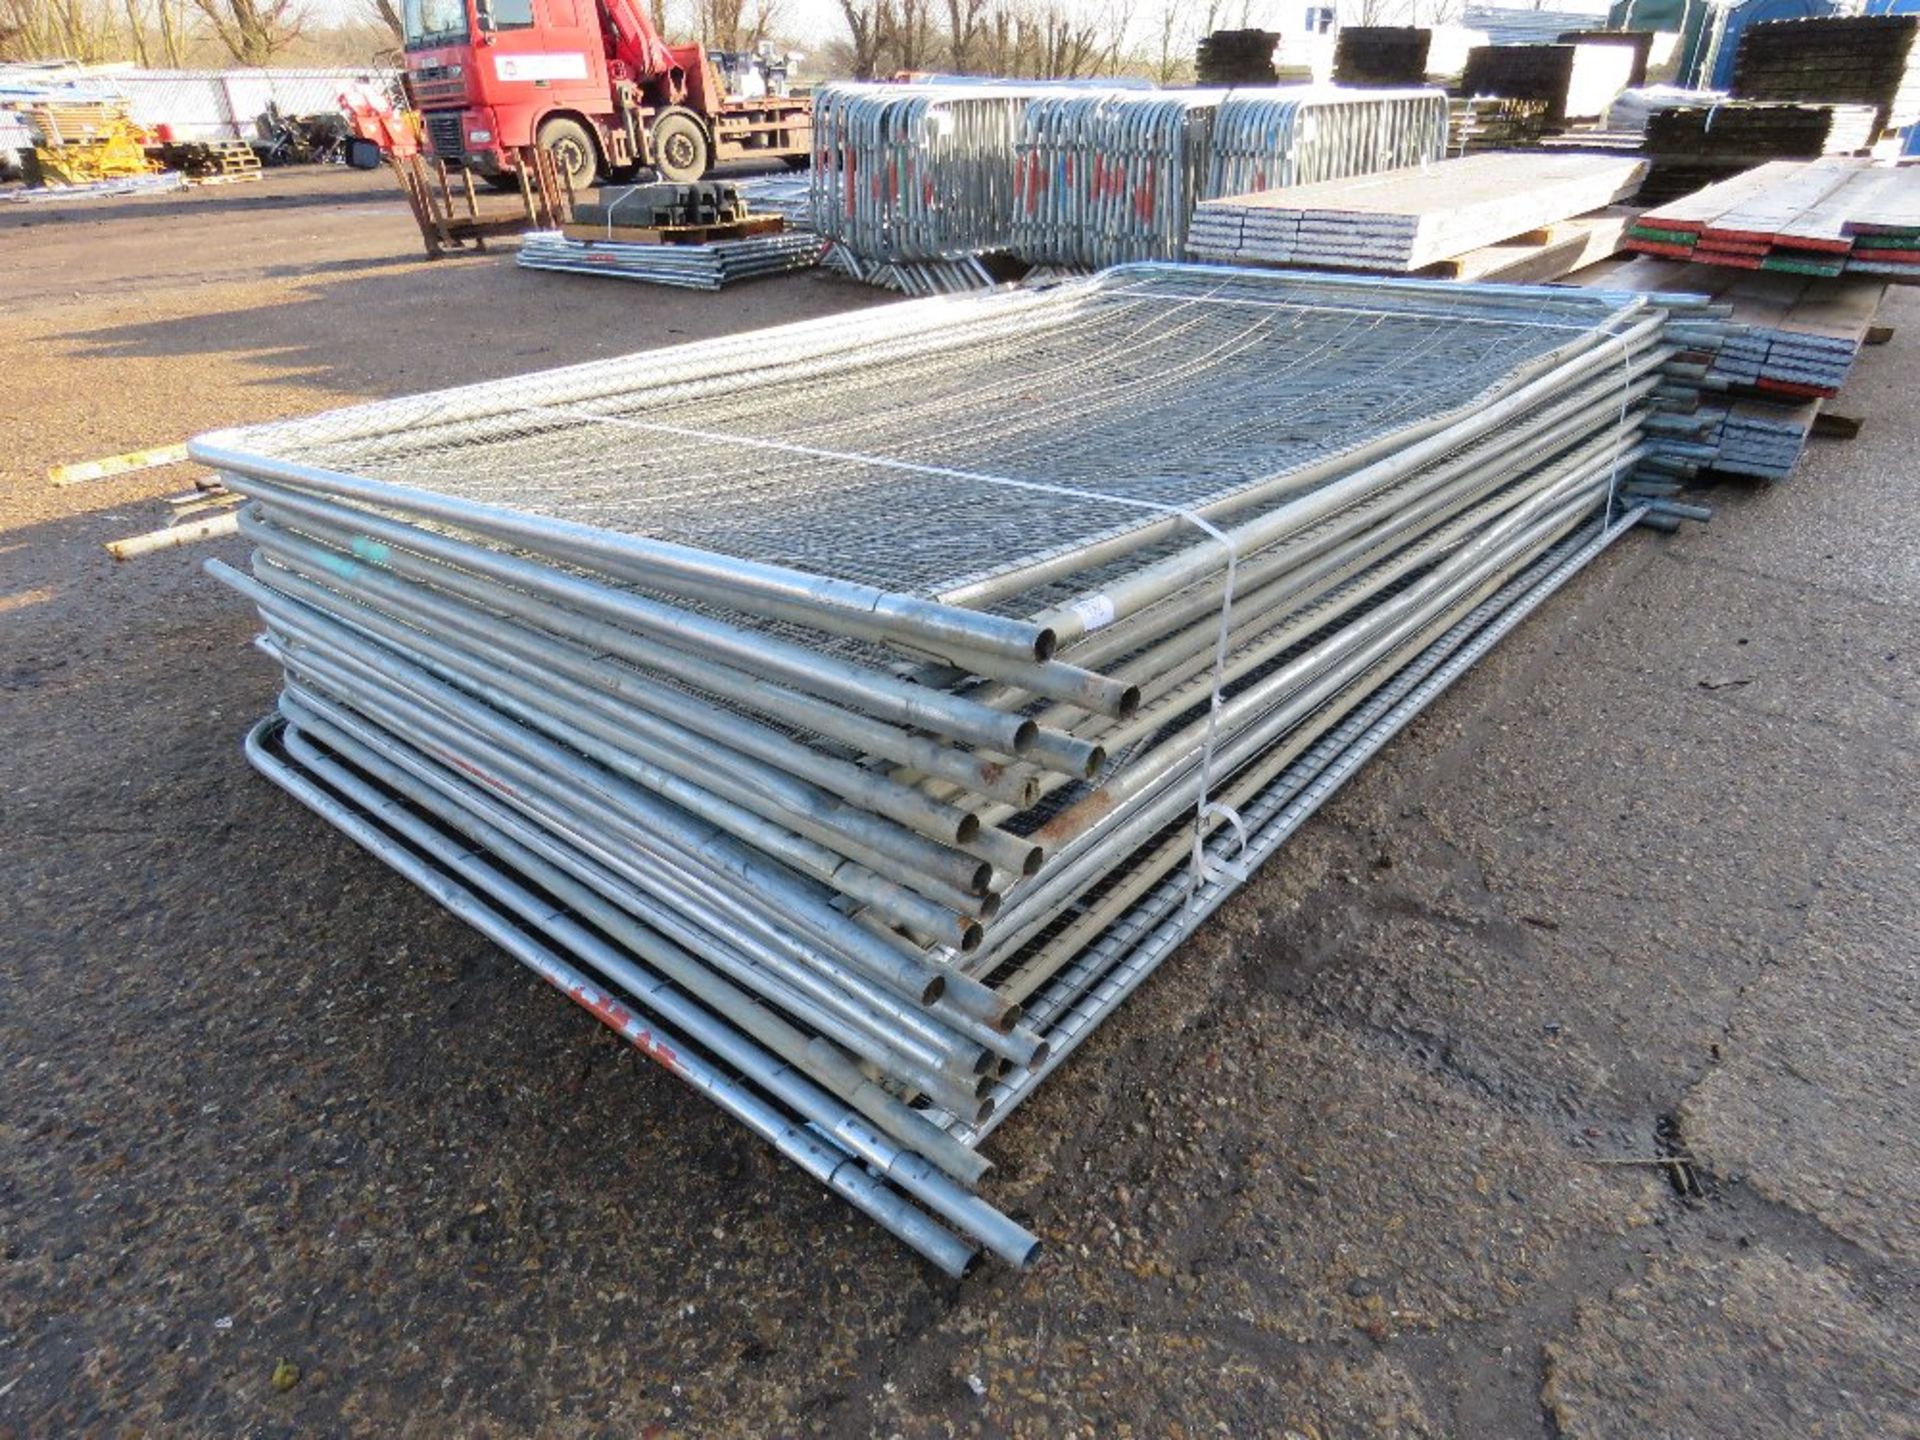 20 X HERAS TYPE TEMPORARY SITE PANELS This items is being item sold under AMS…no vat will be on